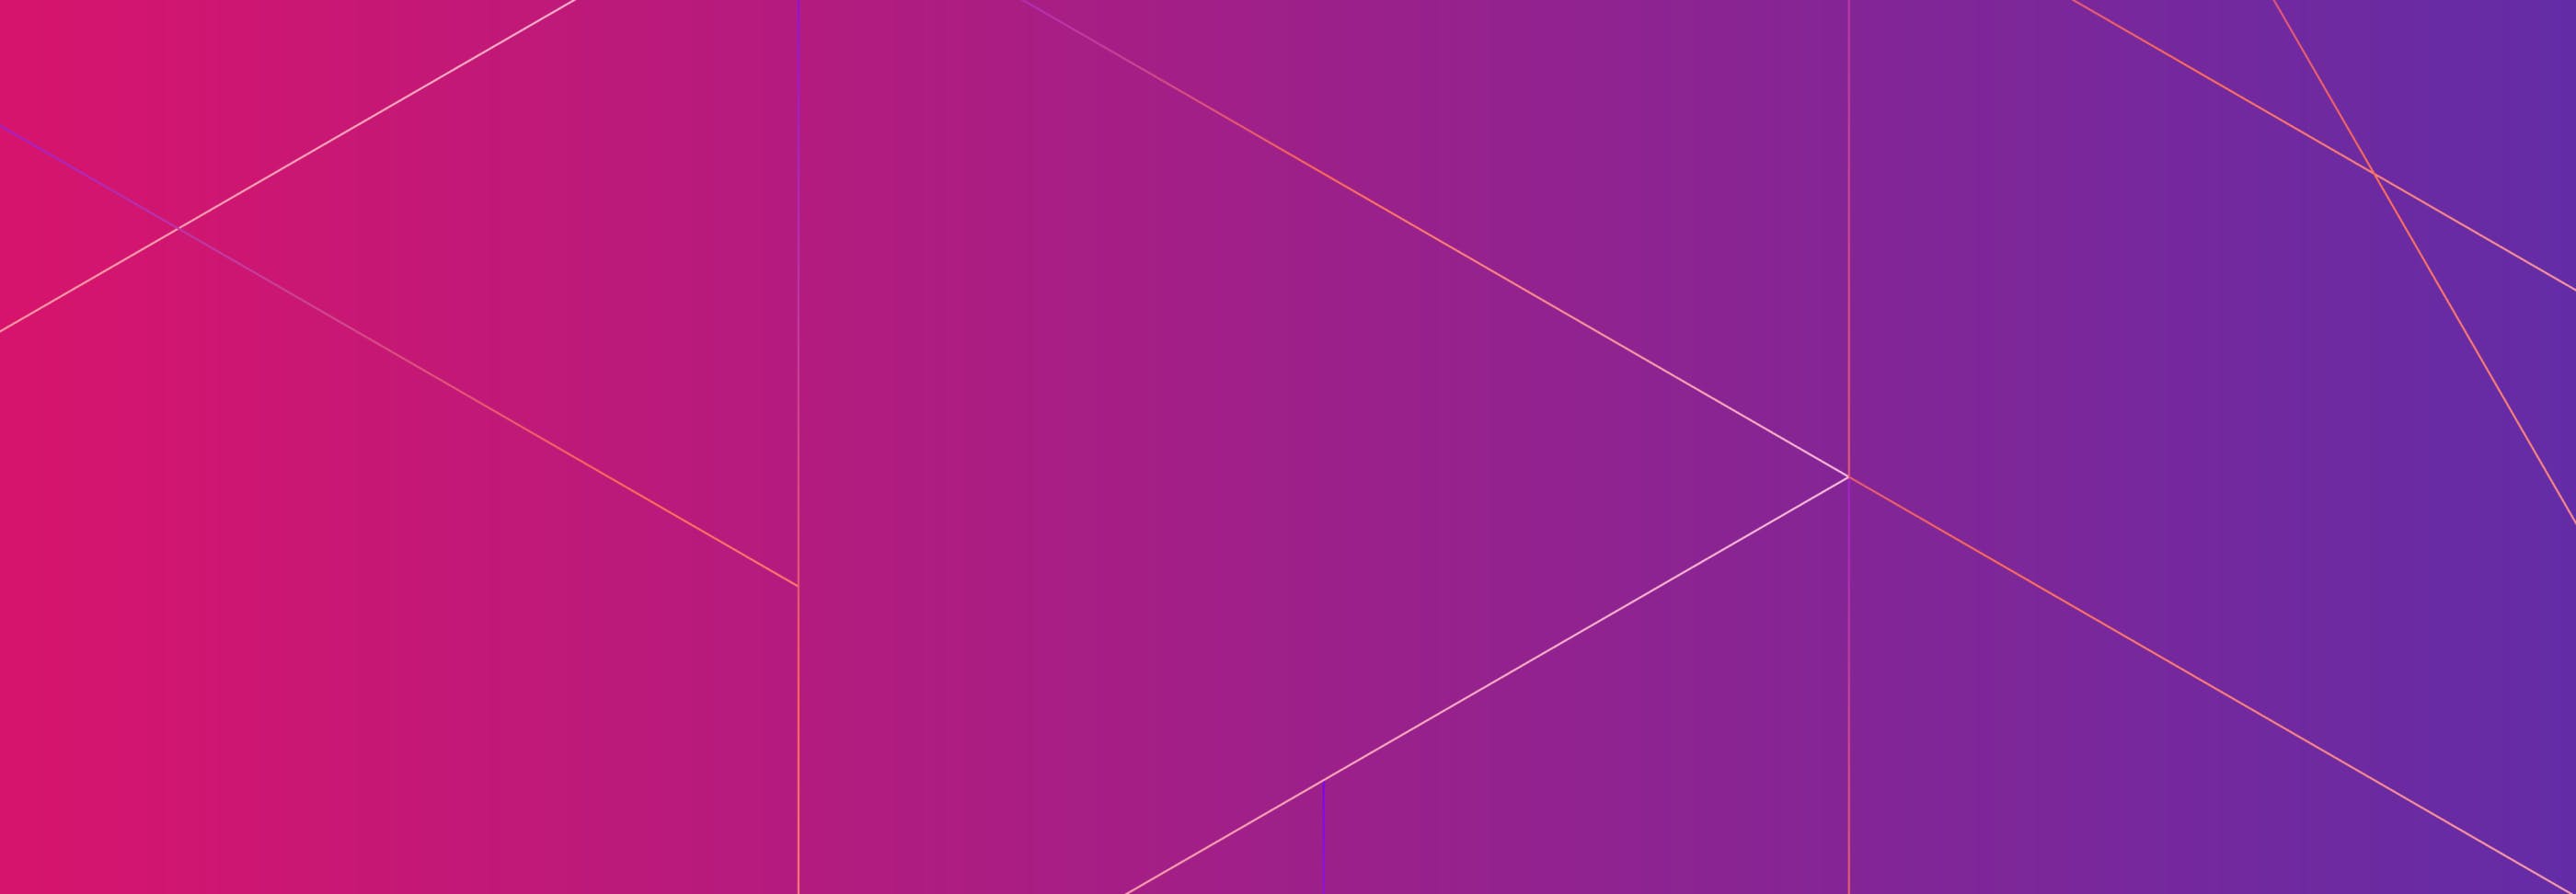 Datadog Announces Annual DASH Conference Set for San Francisco in August